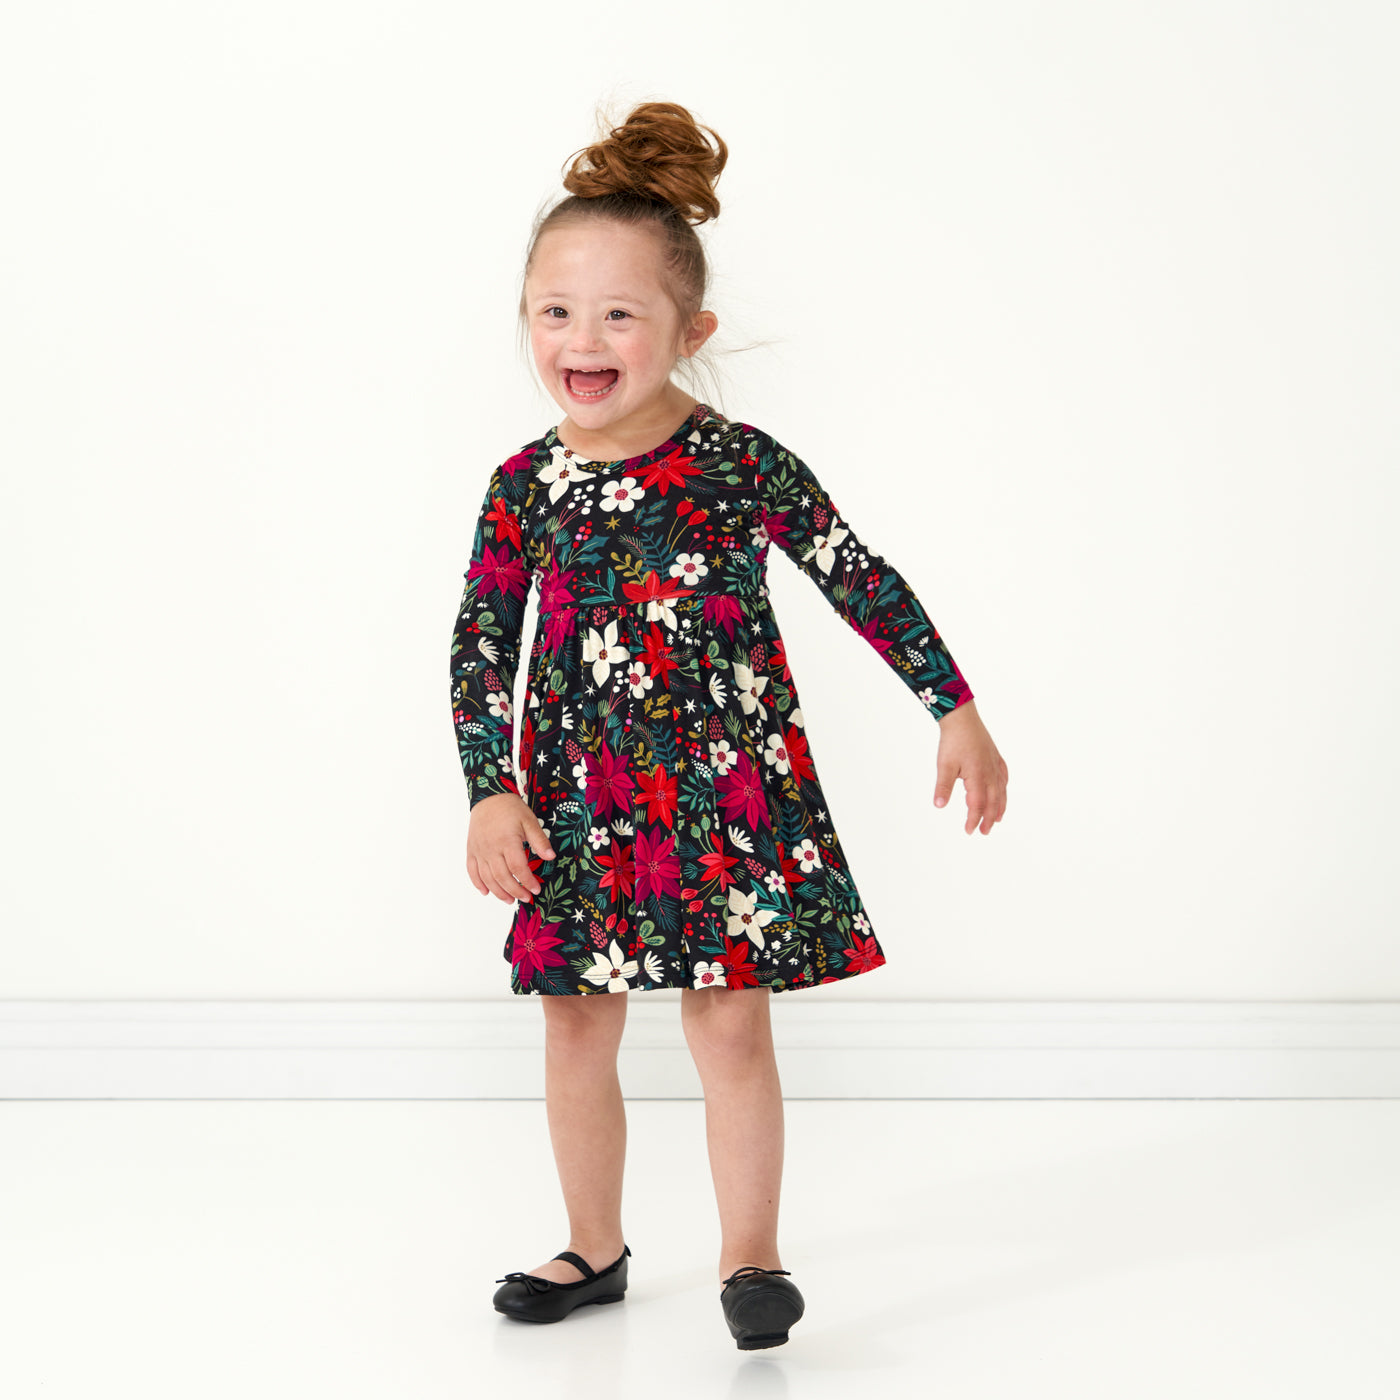 Child dancing wearing a Berry Merry twirl dress with bodysuit